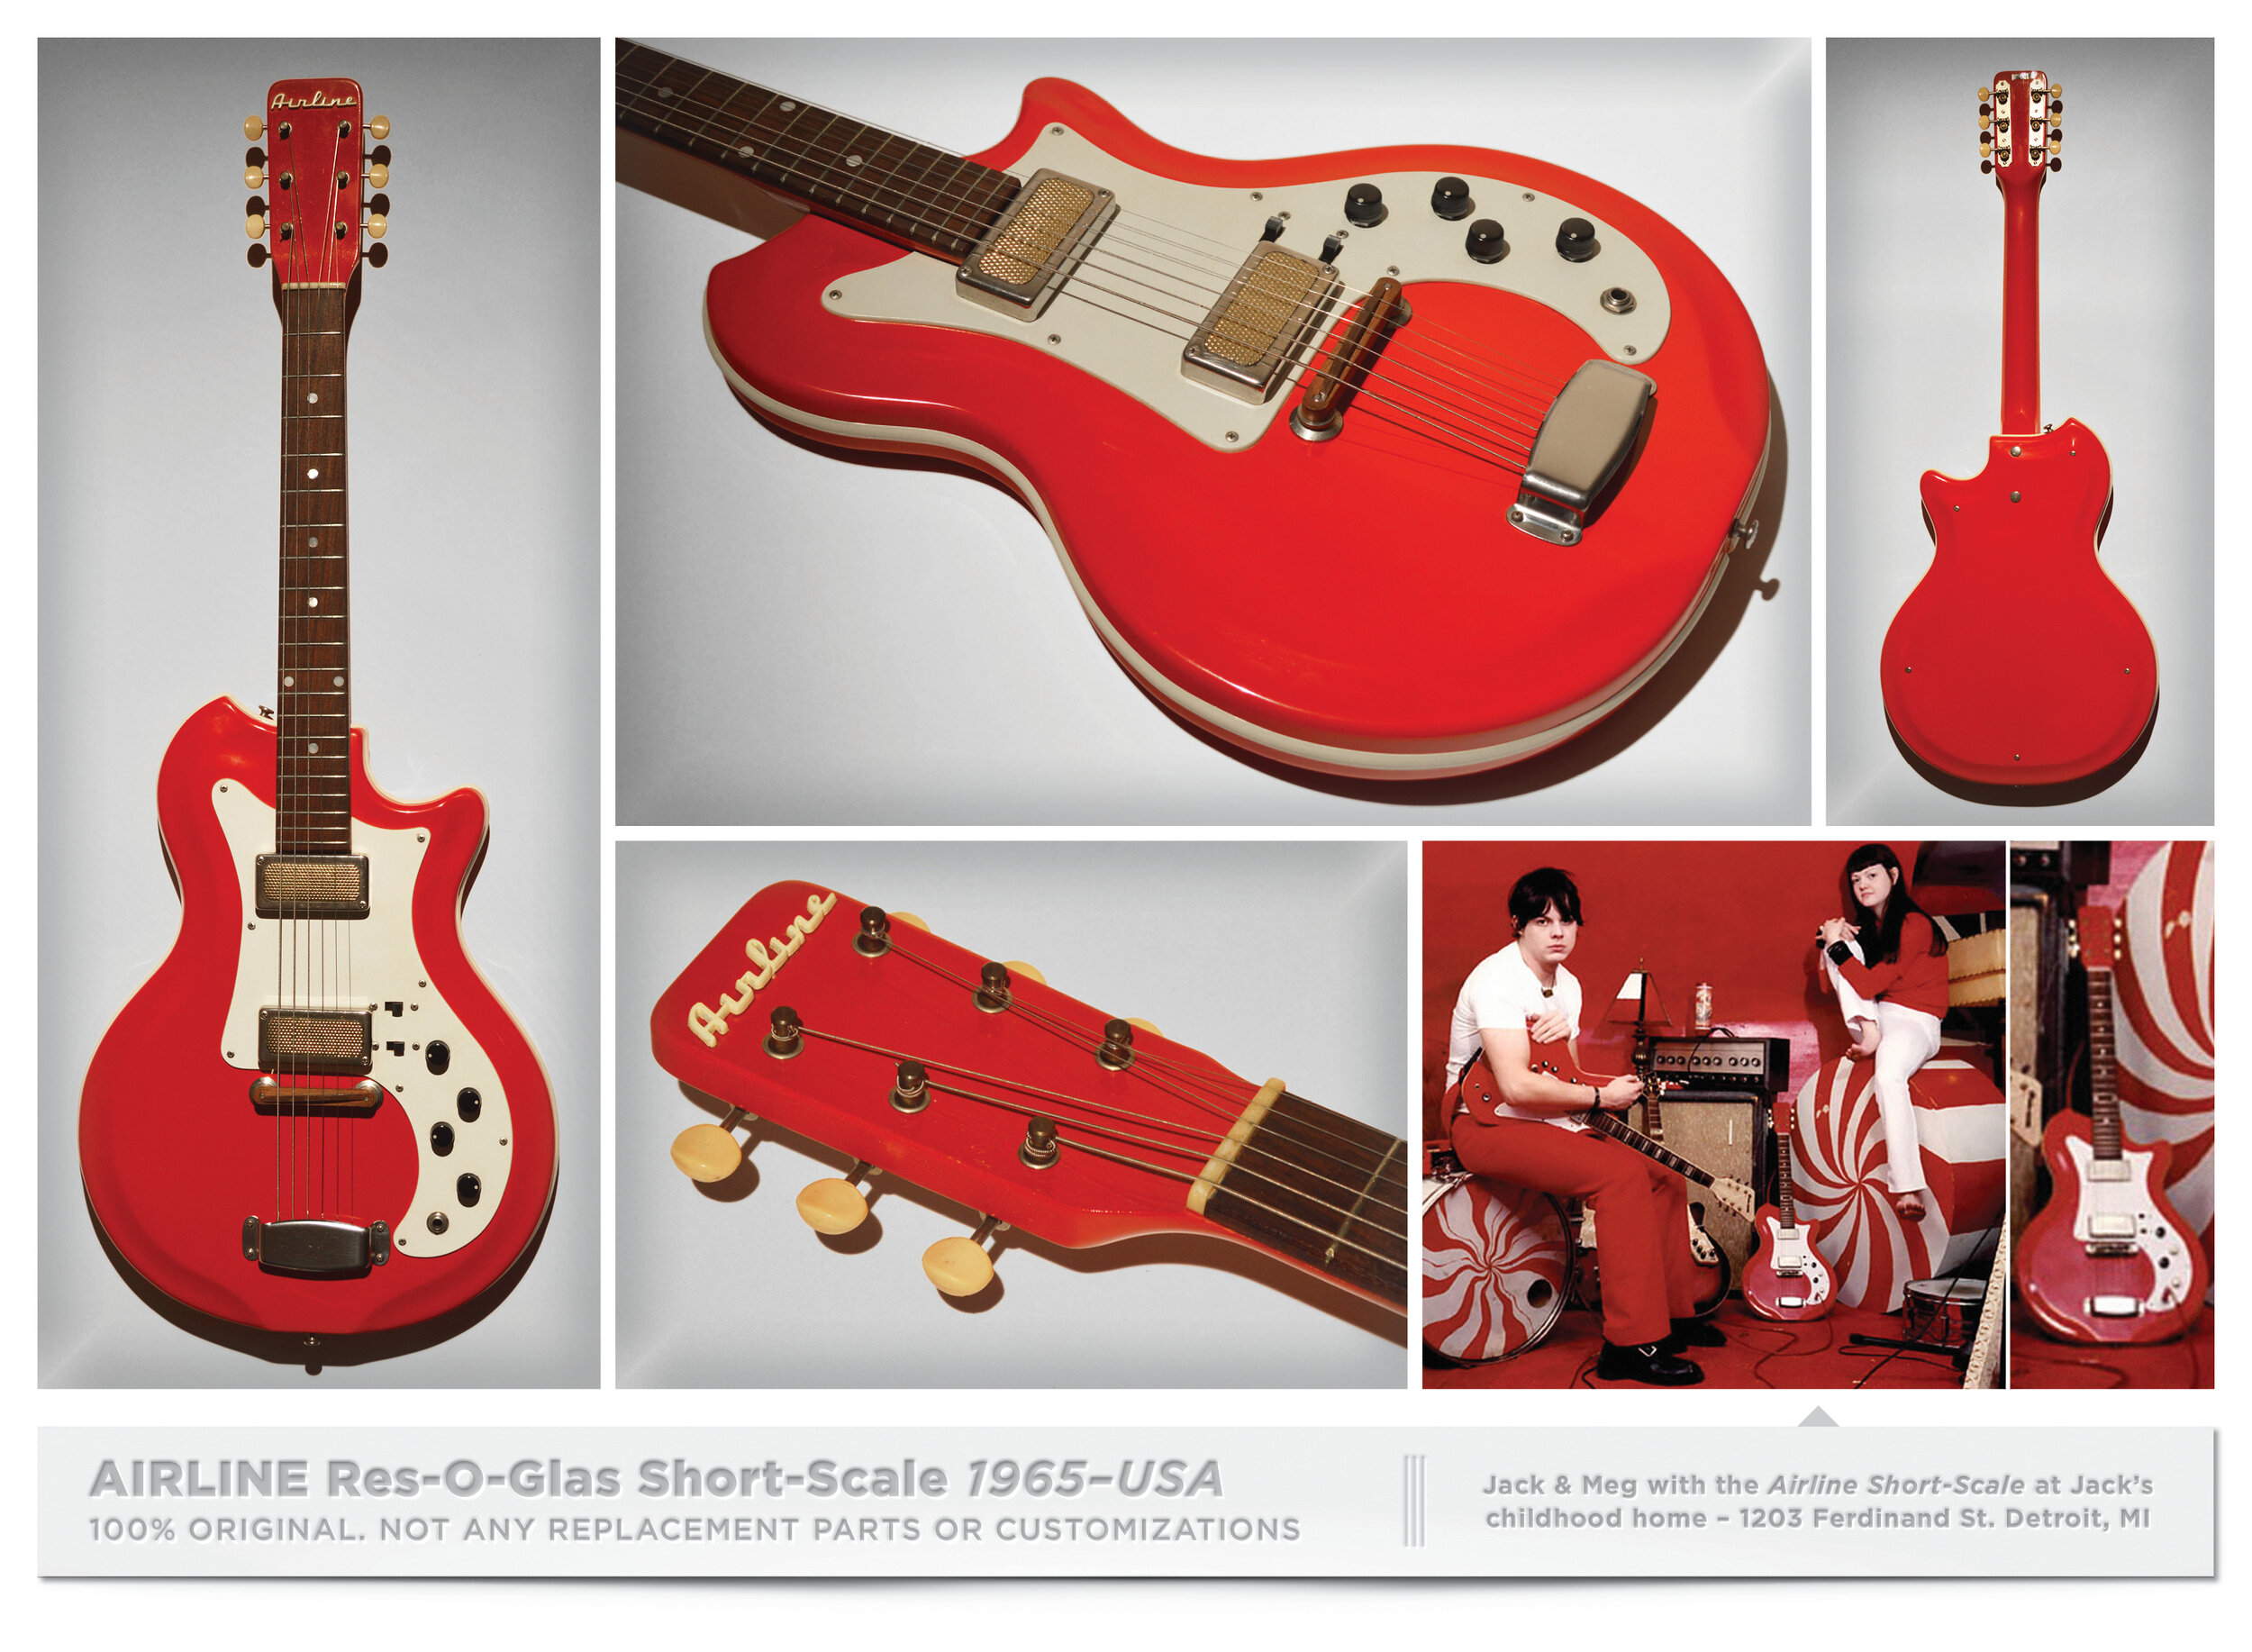 2 AIRLINE Res-O-Glas Short-Scale 1965–USA THE JACK WHITE GUITAR COLLECTION FINAL LAYOUT2.jpg